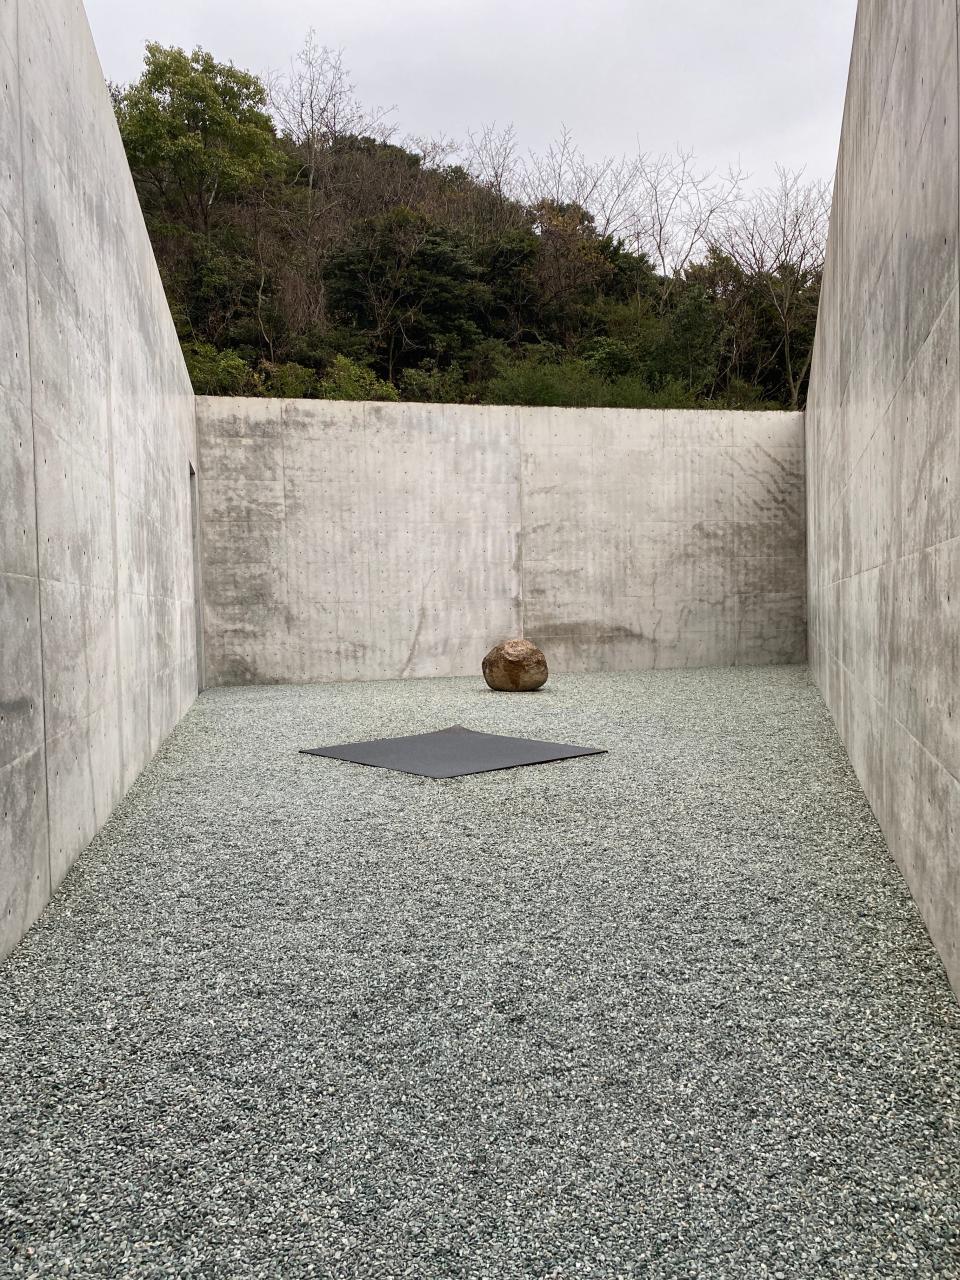 Lee Ufan museum, Naoshima, Japan, Kennedy Hill, "I Spent a Day Exploring One of Japan's Art Islands."